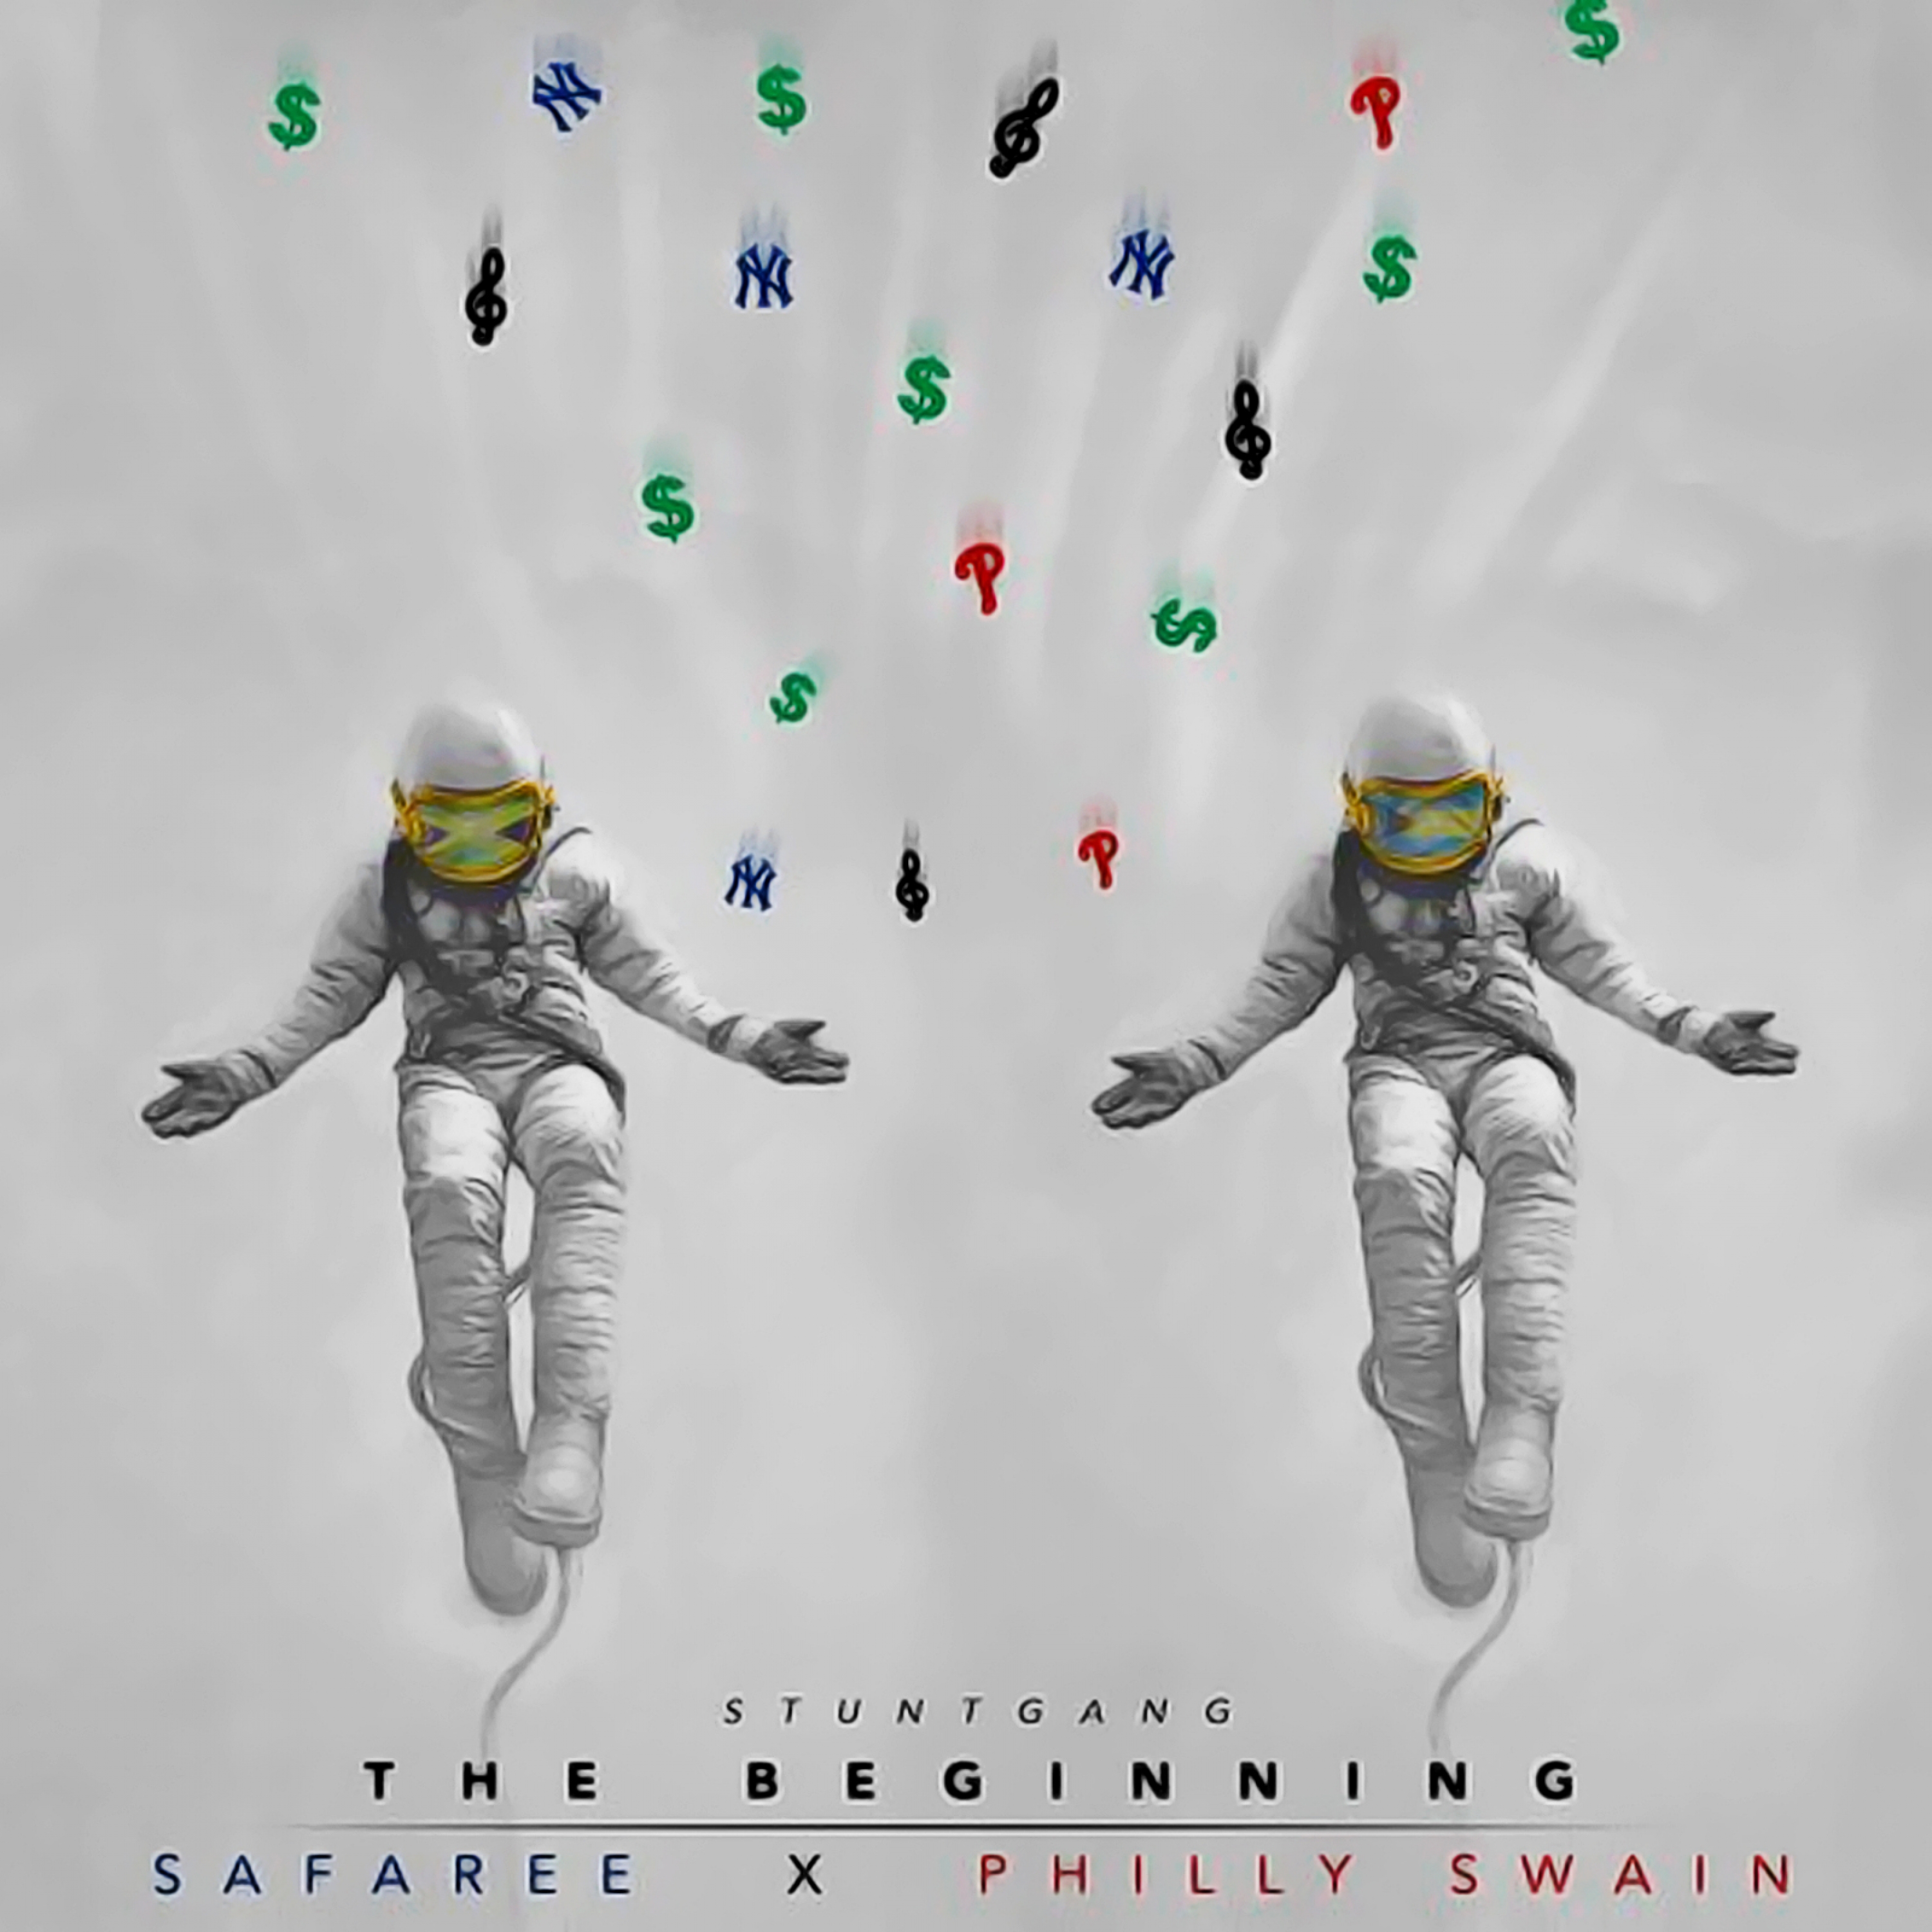 Safaree & Philly Swain Present Stuntgang the Beginning - EP